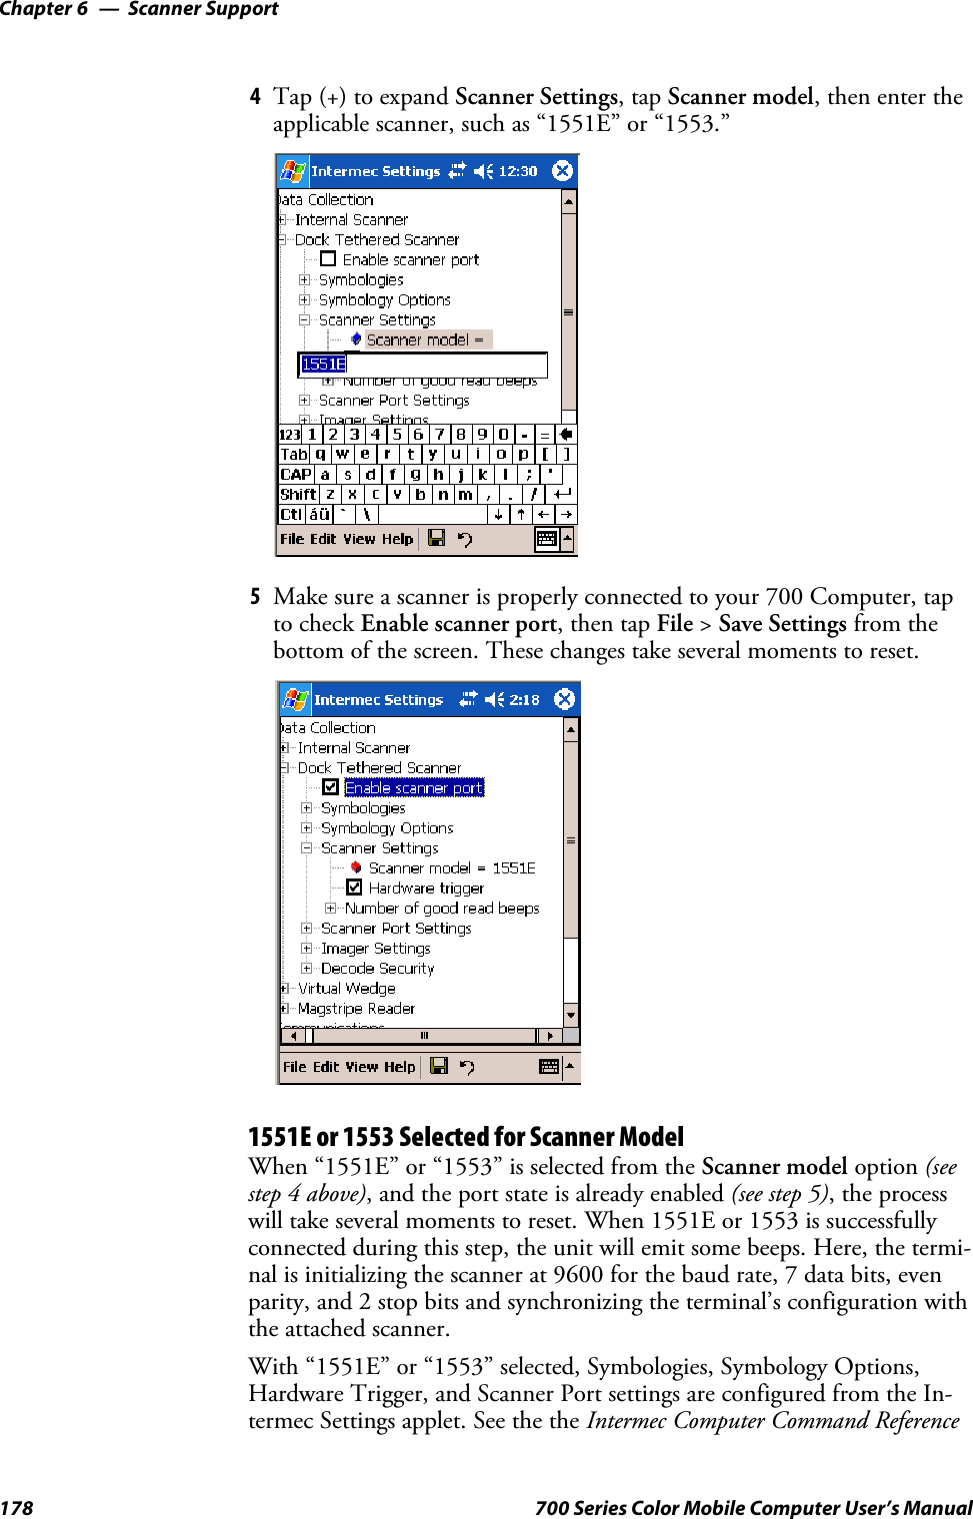 Scanner SupportChapter —6178 700 Series Color Mobile Computer User’s Manual4Tap (+) to expand Scanner Settings,tapScanner model,thenentertheapplicable scanner, such as “1551E” or “1553.”5Make sure a scanner is properly connected to your 700 Computer, tapto check Enable scanner port,thentapFile &gt;Save Settings from thebottom of the screen. These changes take several moments to reset.1551E or 1553 Selected for Scanner ModelWhen “1551E” or “1553” is selected from the Scanner model option (seestep 4 above), and the port state is already enabled (see step 5),theprocesswill take several moments to reset. When 1551E or 1553 is successfullyconnected during this step, the unit will emit some beeps. Here, the termi-nal is initializing the scanner at 9600 for the baud rate, 7 data bits, evenparity, and 2 stop bits and synchronizing the terminal’s configuration withthe attached scanner.With “1551E” or “1553” selected, Symbologies, Symbology Options,Hardware Trigger, and Scanner Port settings are configured from the In-termec Settings applet. See the the Intermec Computer Command Reference